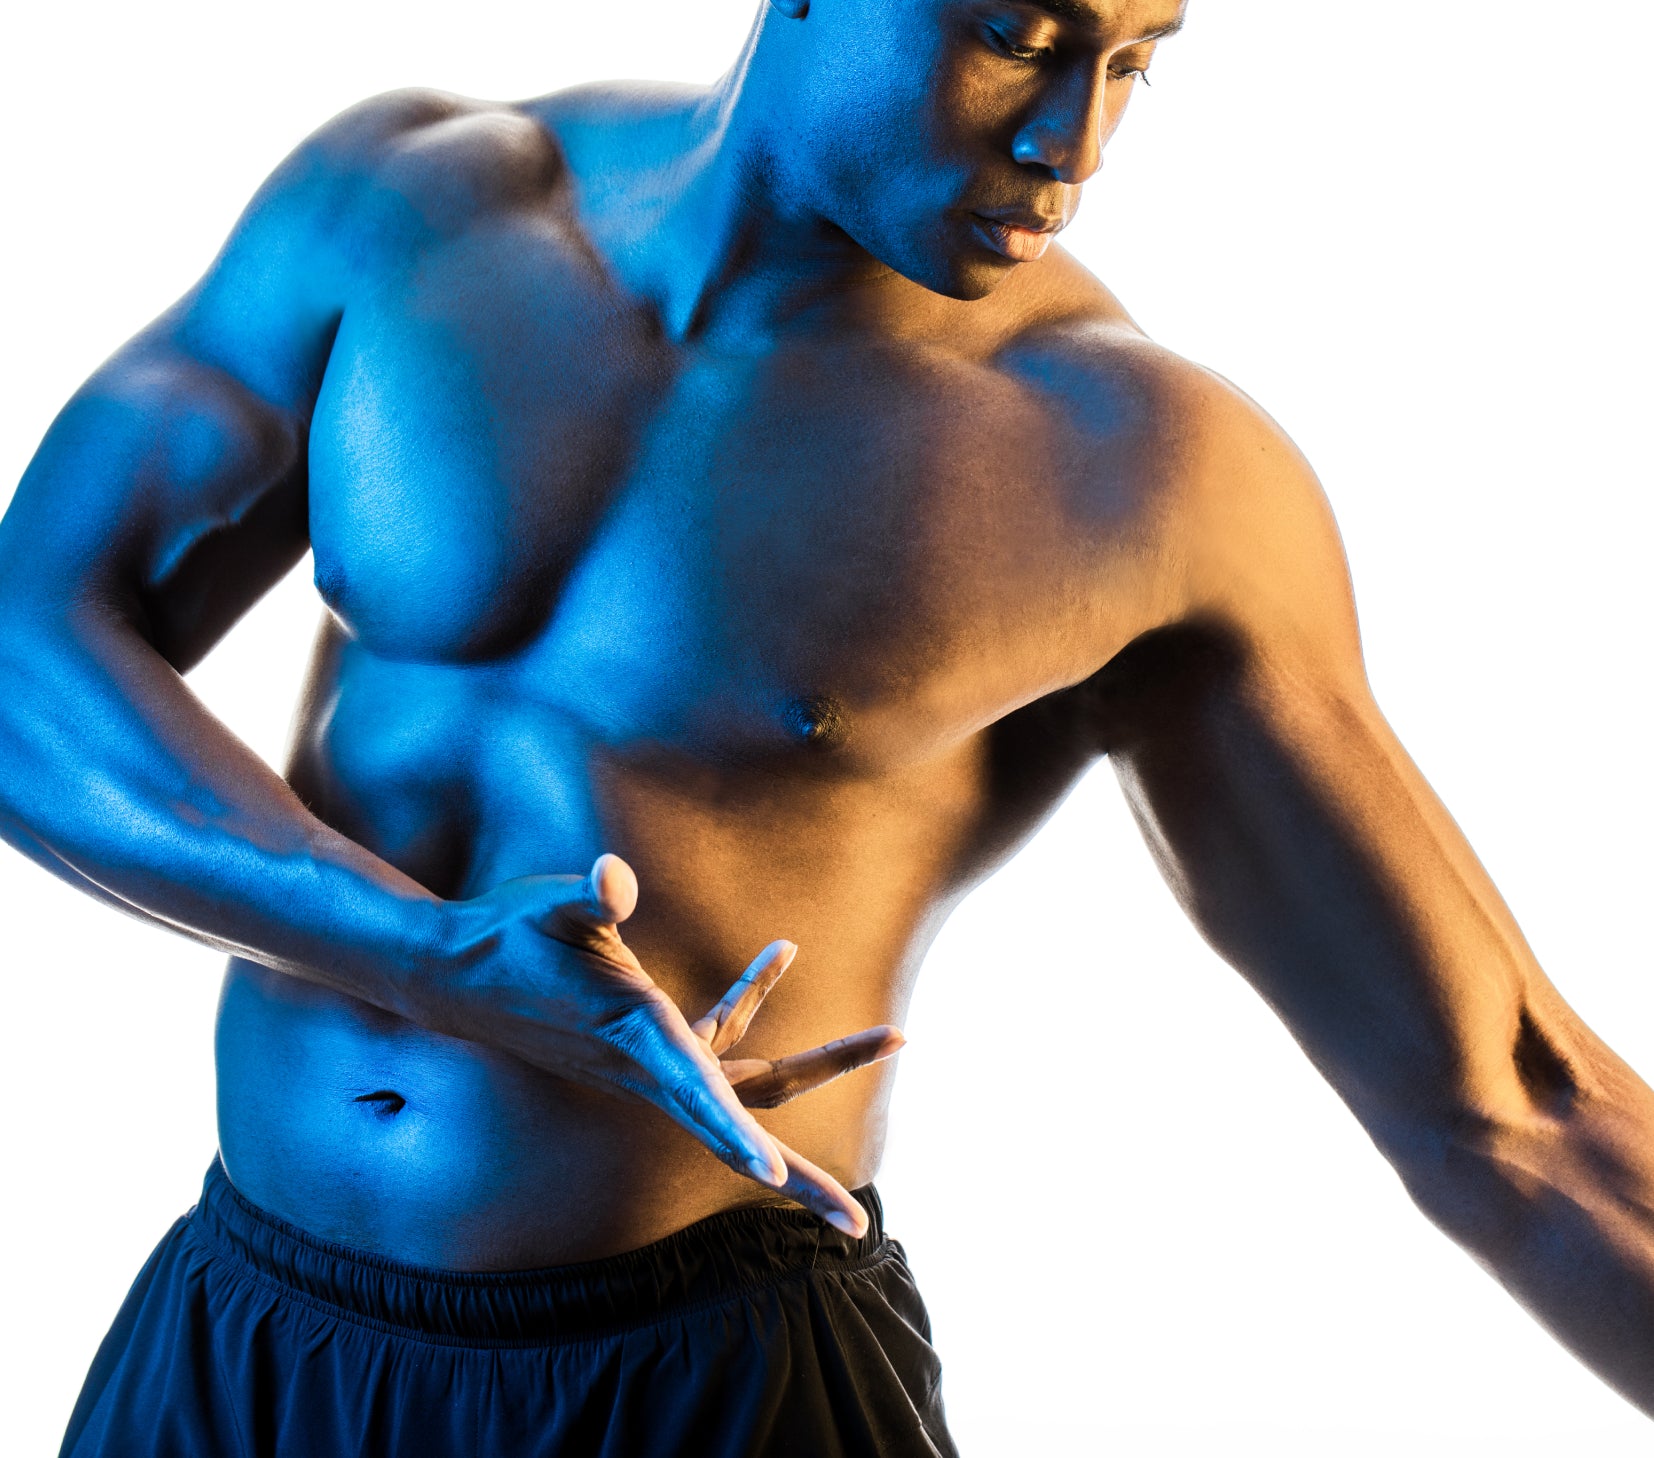 Man with no shirt and black shorts facing the camera with a blue glow to his skin, head tilted down and arms flexed